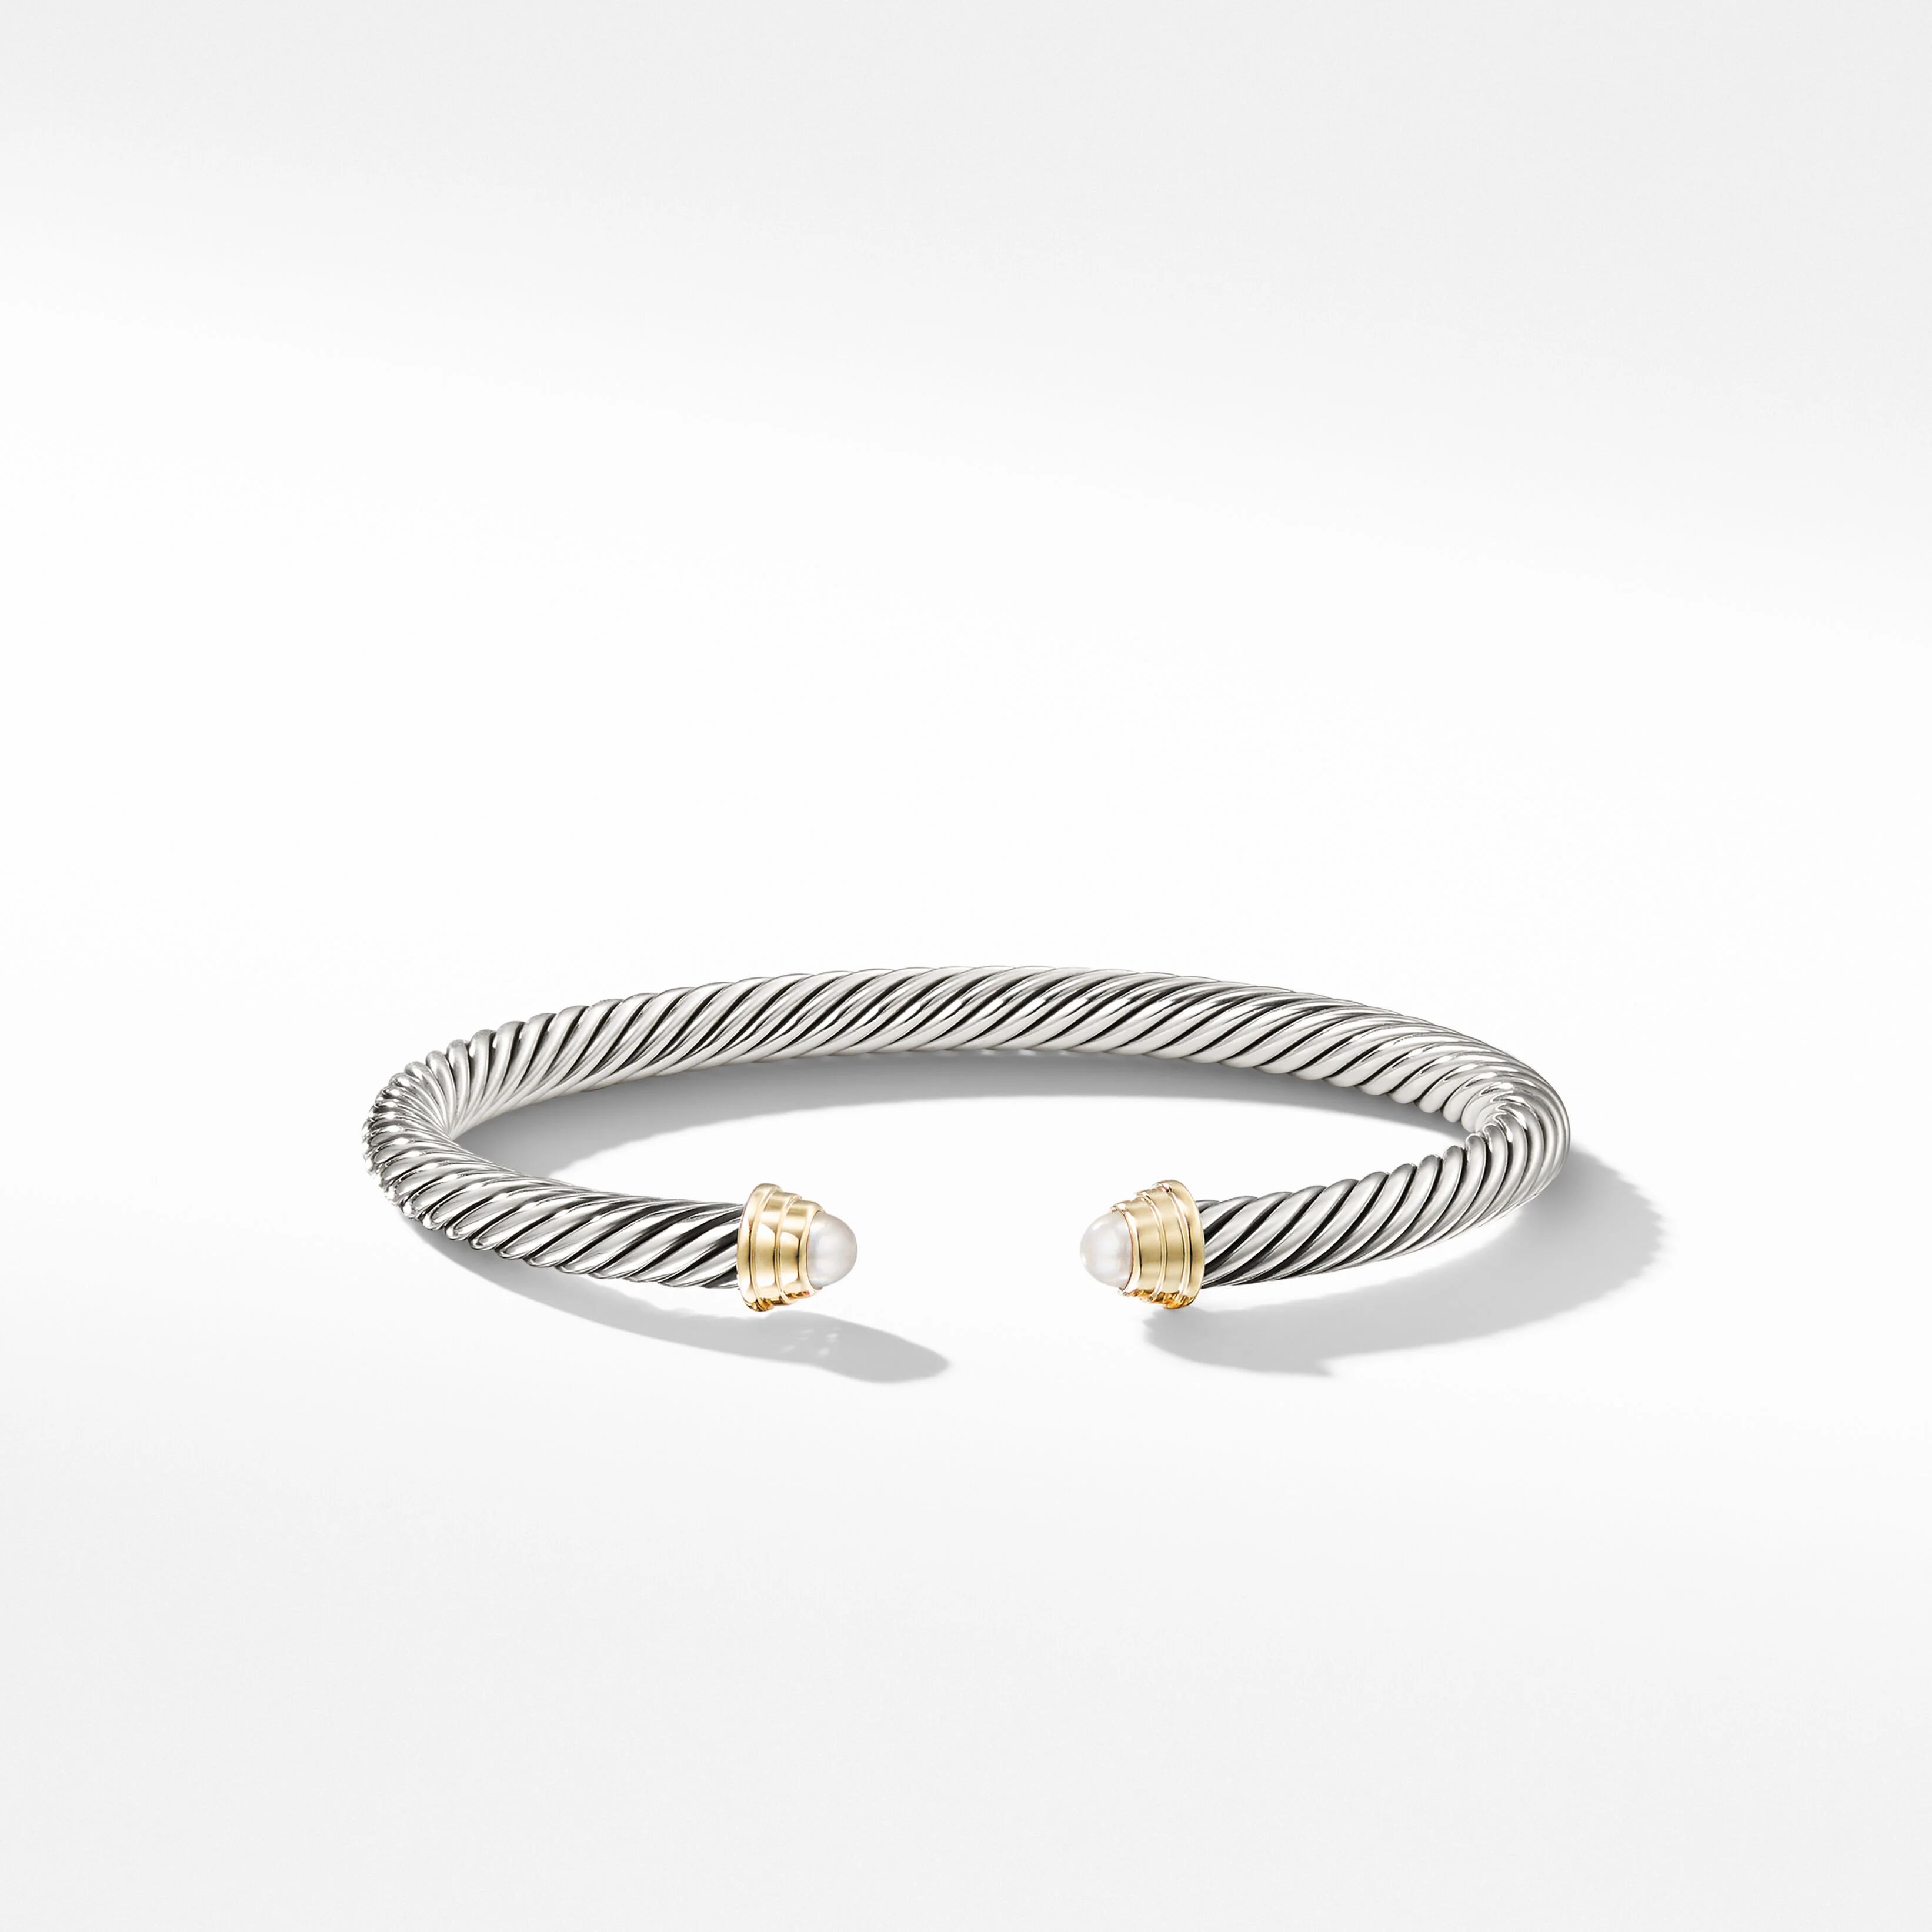 Cable Kids® Bracelet in Sterling Silver with Pearls and 14K Yellow Gold | David Yurman